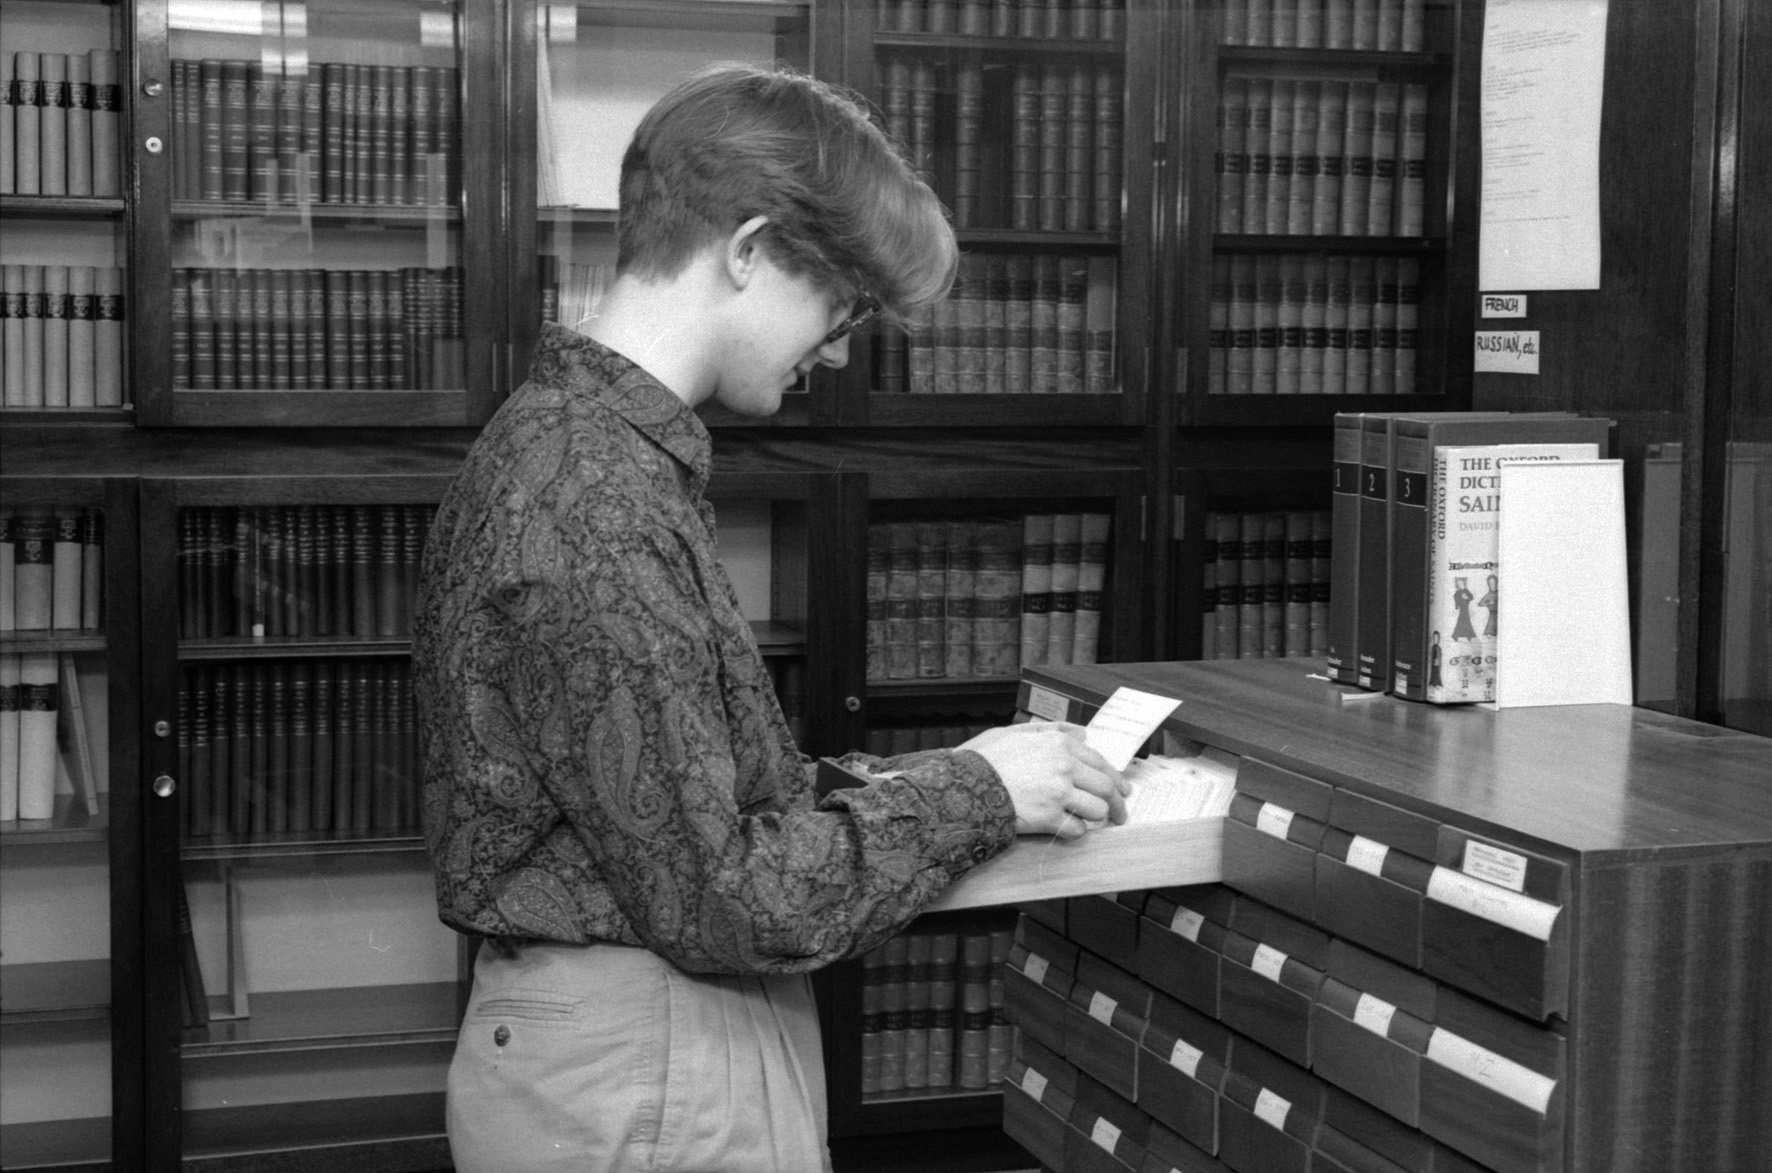 Rupert Shepherd, Periodicals Librarian, filing periodicals index cards in the National Gallery Library, c.1991.